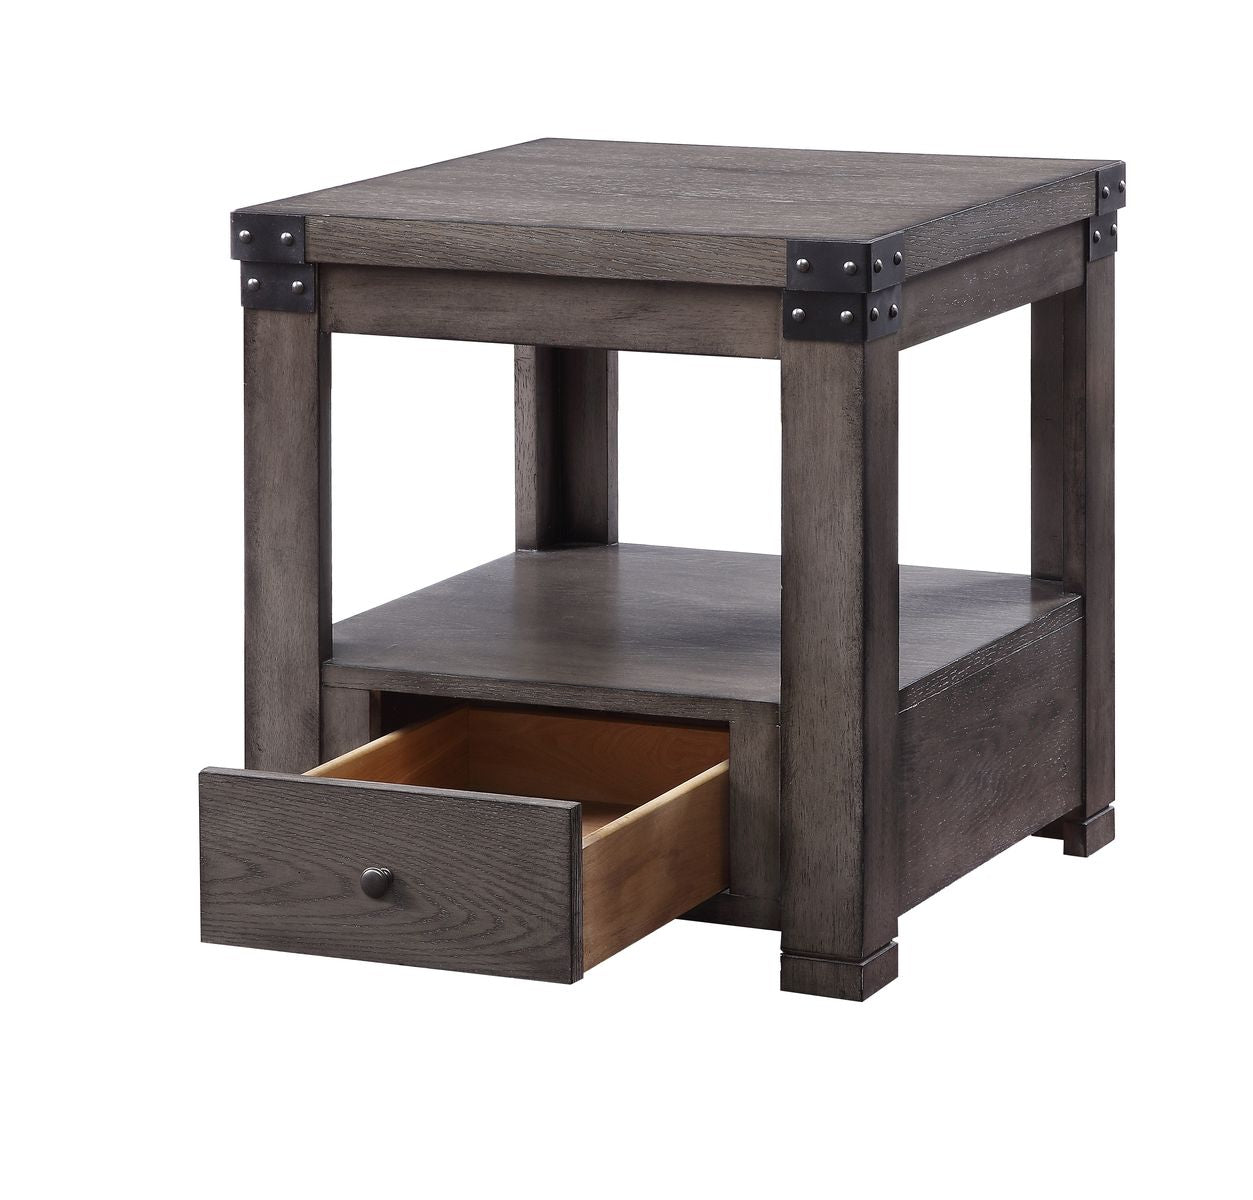 Melville End Table, Ash Gray 87102 - Demine Essentials